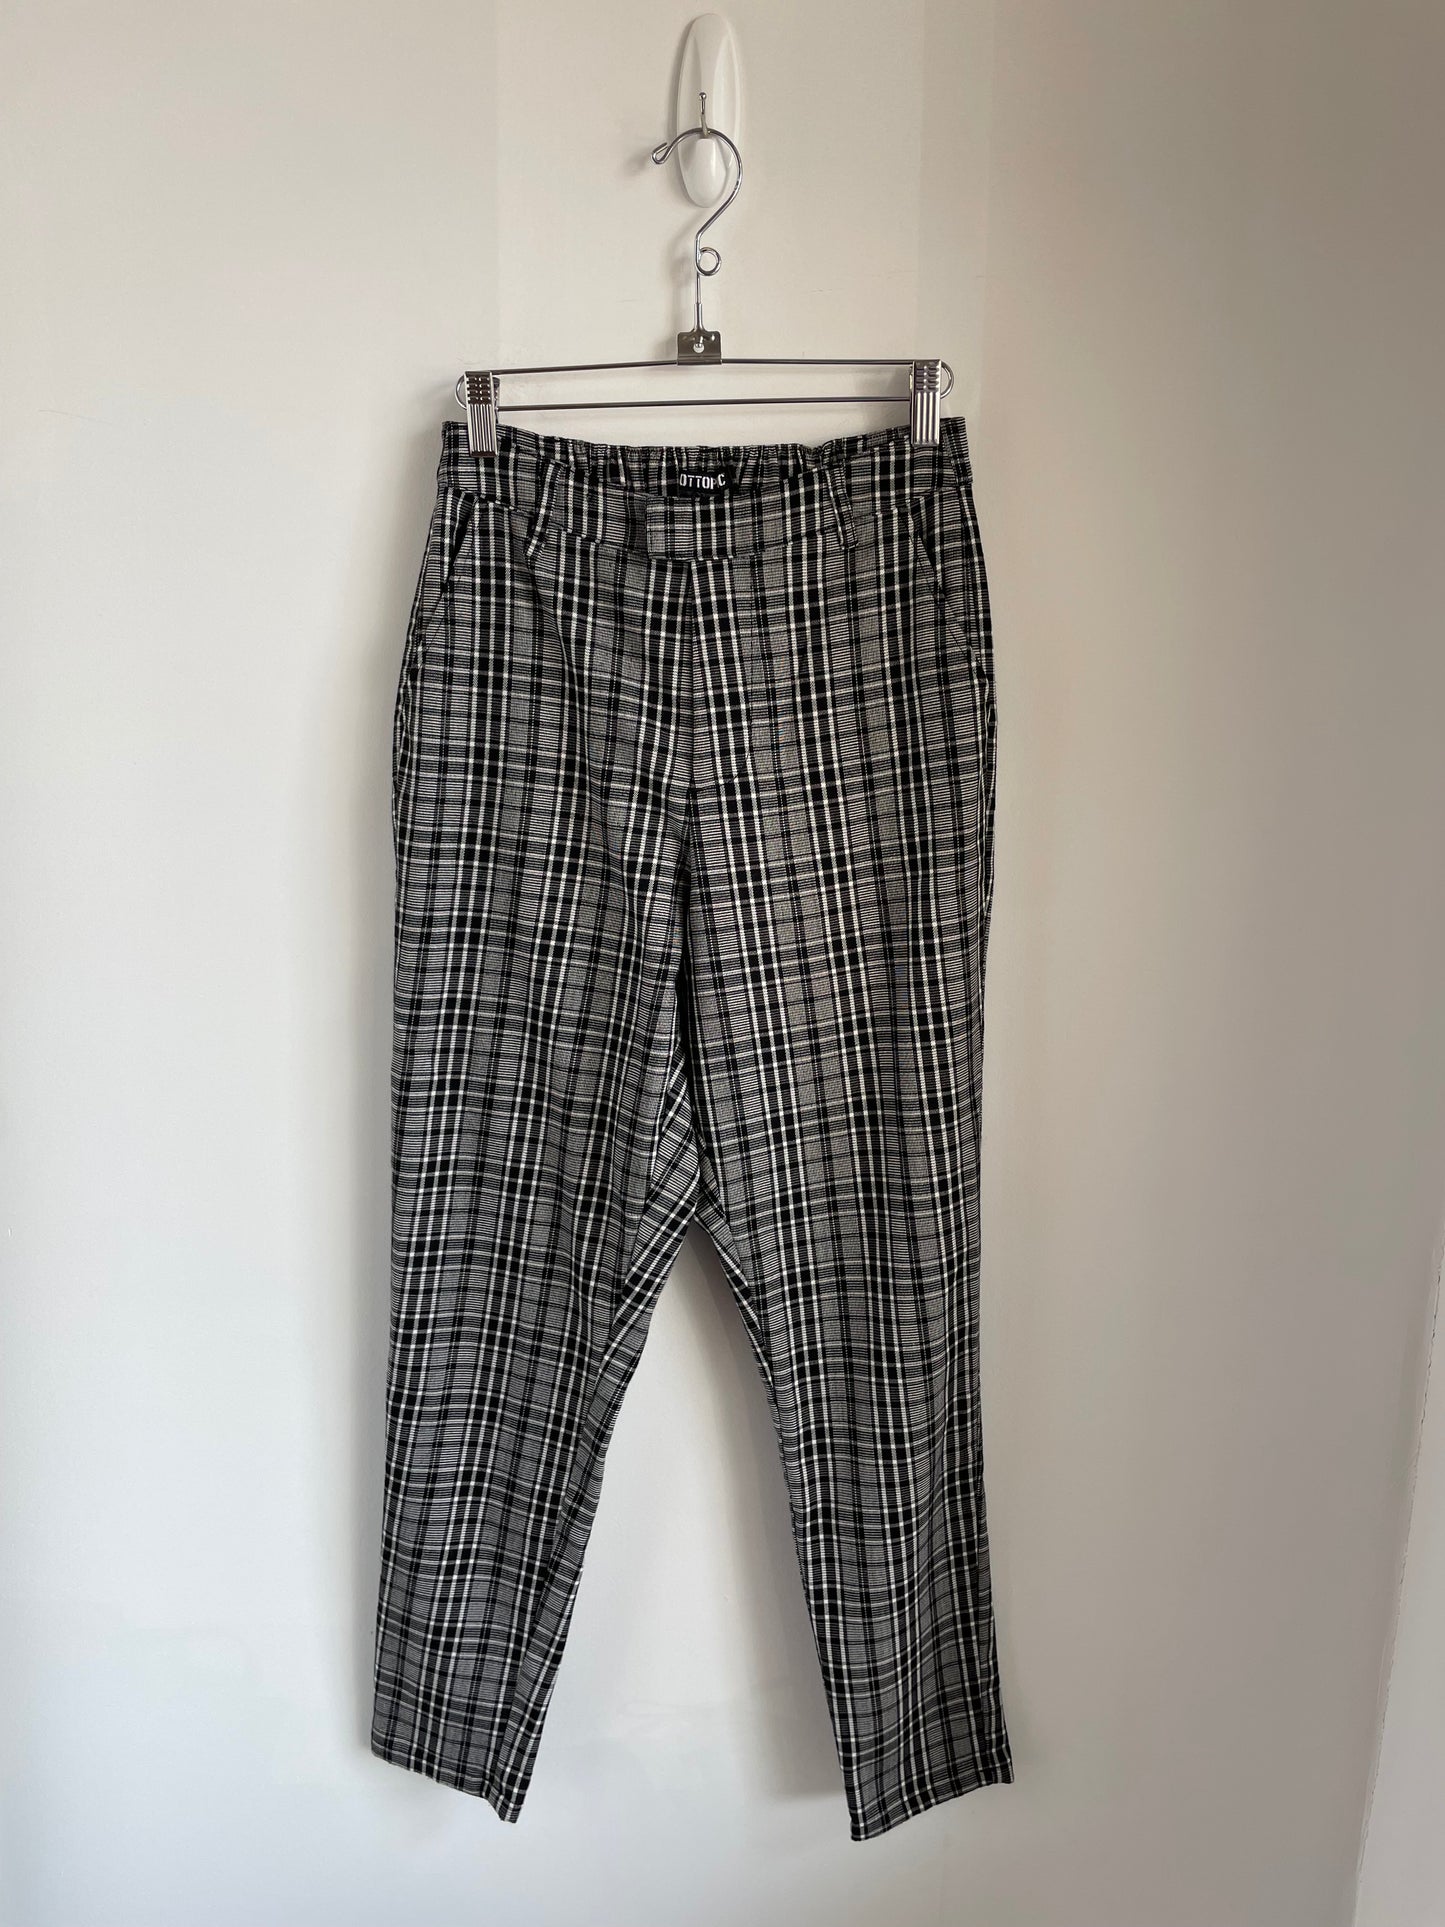 Hot Topic Plaid Dress Pants – Curated Consignment Qualicum